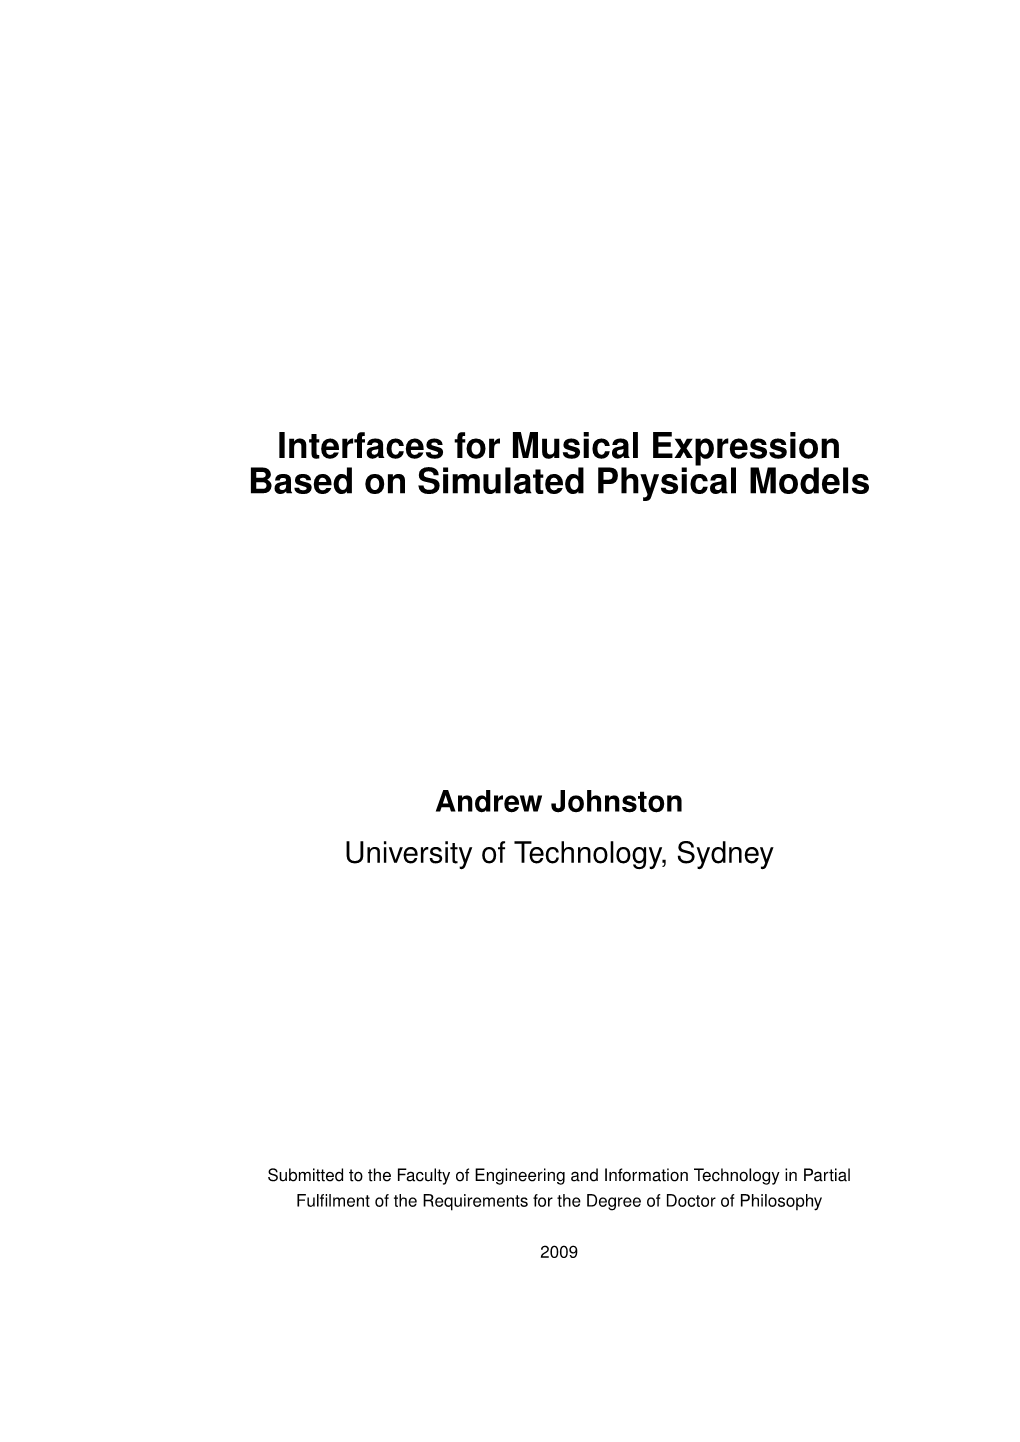 Interfaces for Musical Expression Based on Simulated Physical Models